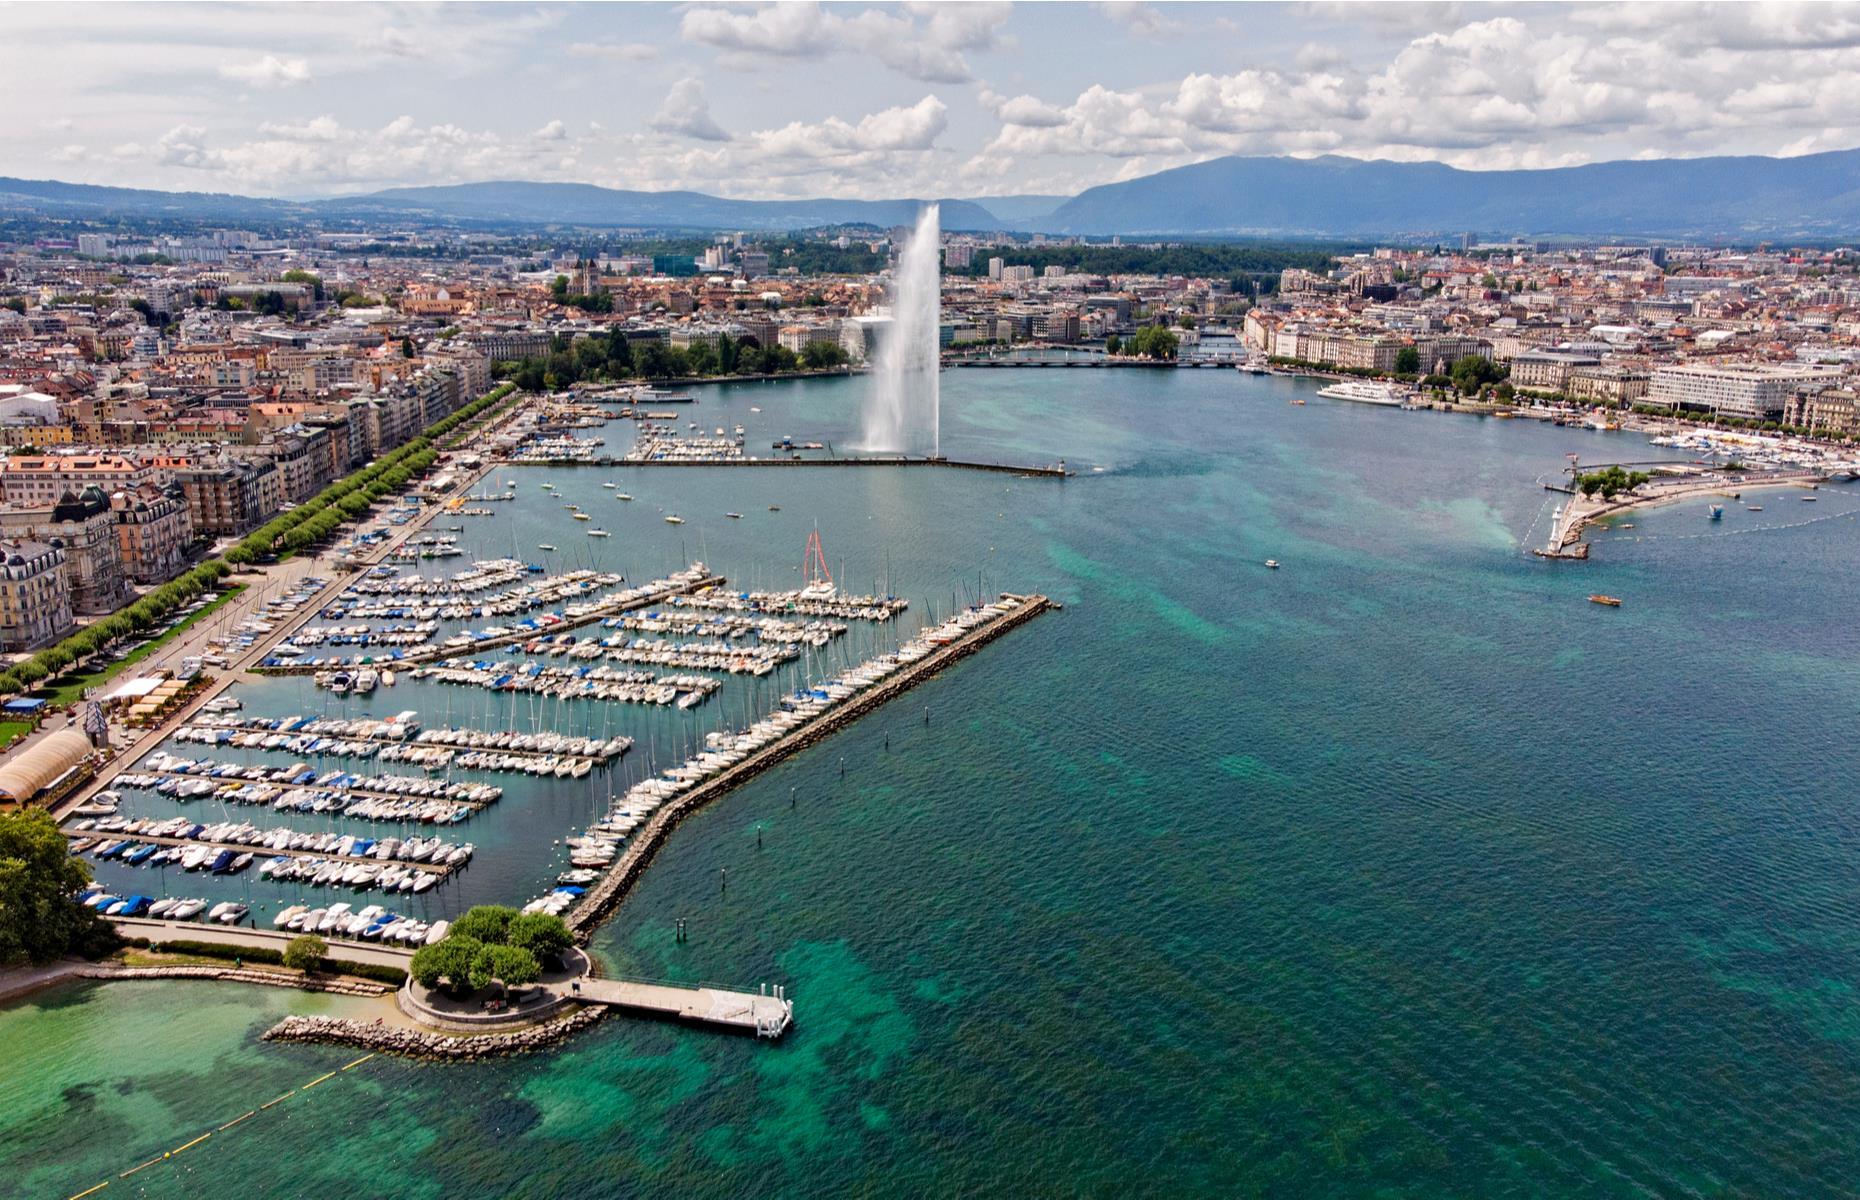 <p>One of Geneva Harbour’s most recognisable features is the 460-feet tall (140m) Jet d’Eau water jet that springs out from the lake and pumps out 500 litres (132 gallons) of water per second. Seen from above, the harbour filled with yachts and surrounded by stunning mountains is a sight to behold. Take a look at <a href="https://www.loveexploring.com/galleries/81954/54-of-the-worlds-most-incredible-photos-from-above">the world's most incredible photos from above</a>.</p>